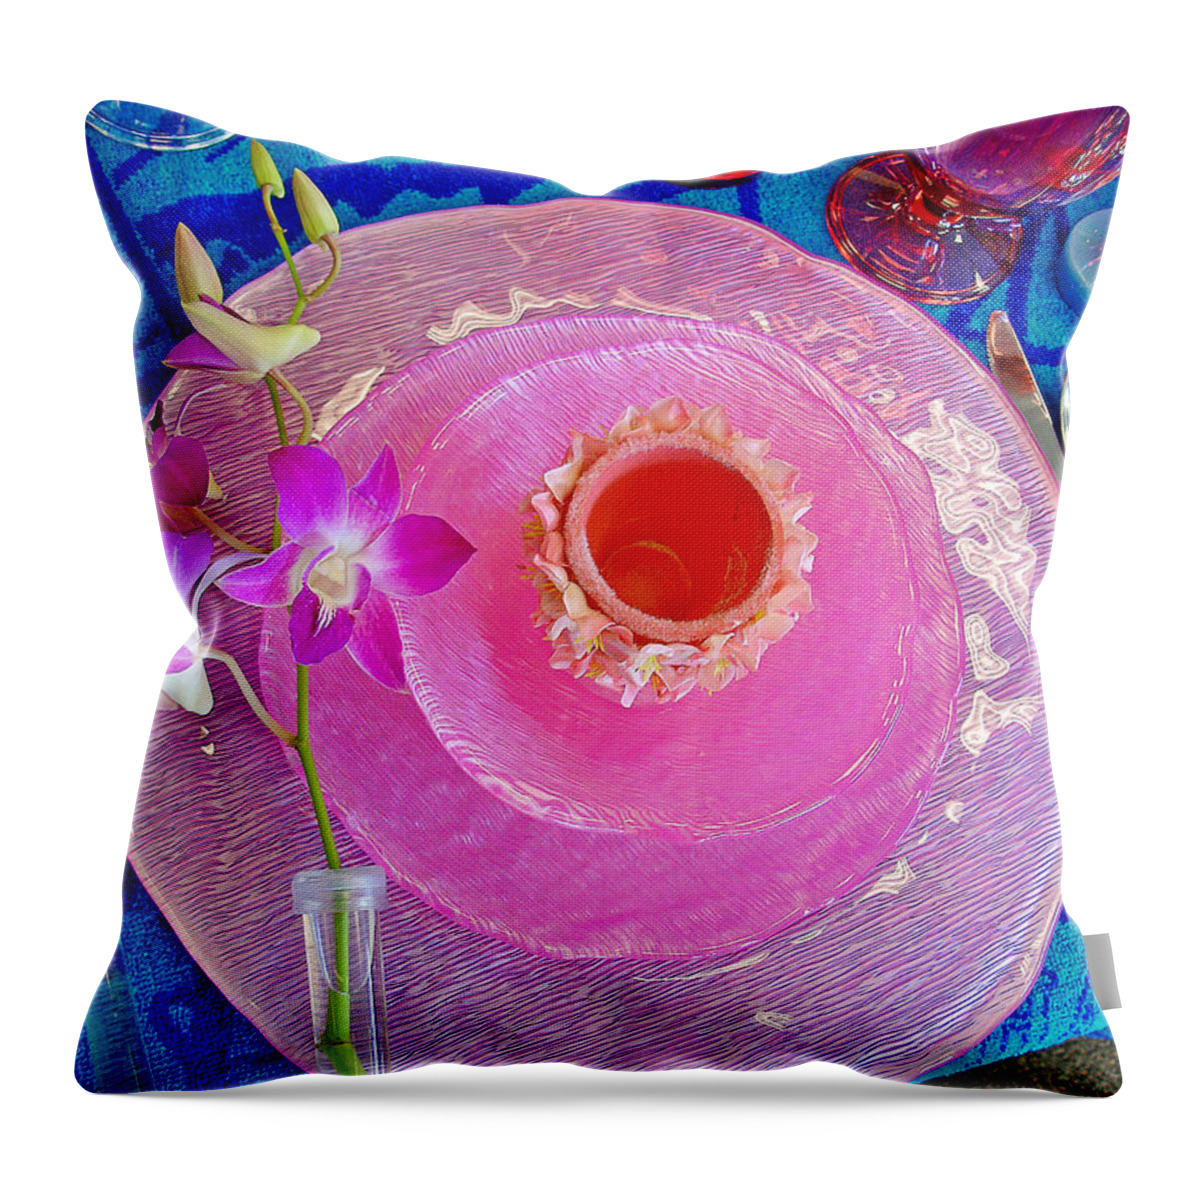 Pink Throw Pillow featuring the photograph Pink Place Setting by Robert Meyers-Lussier